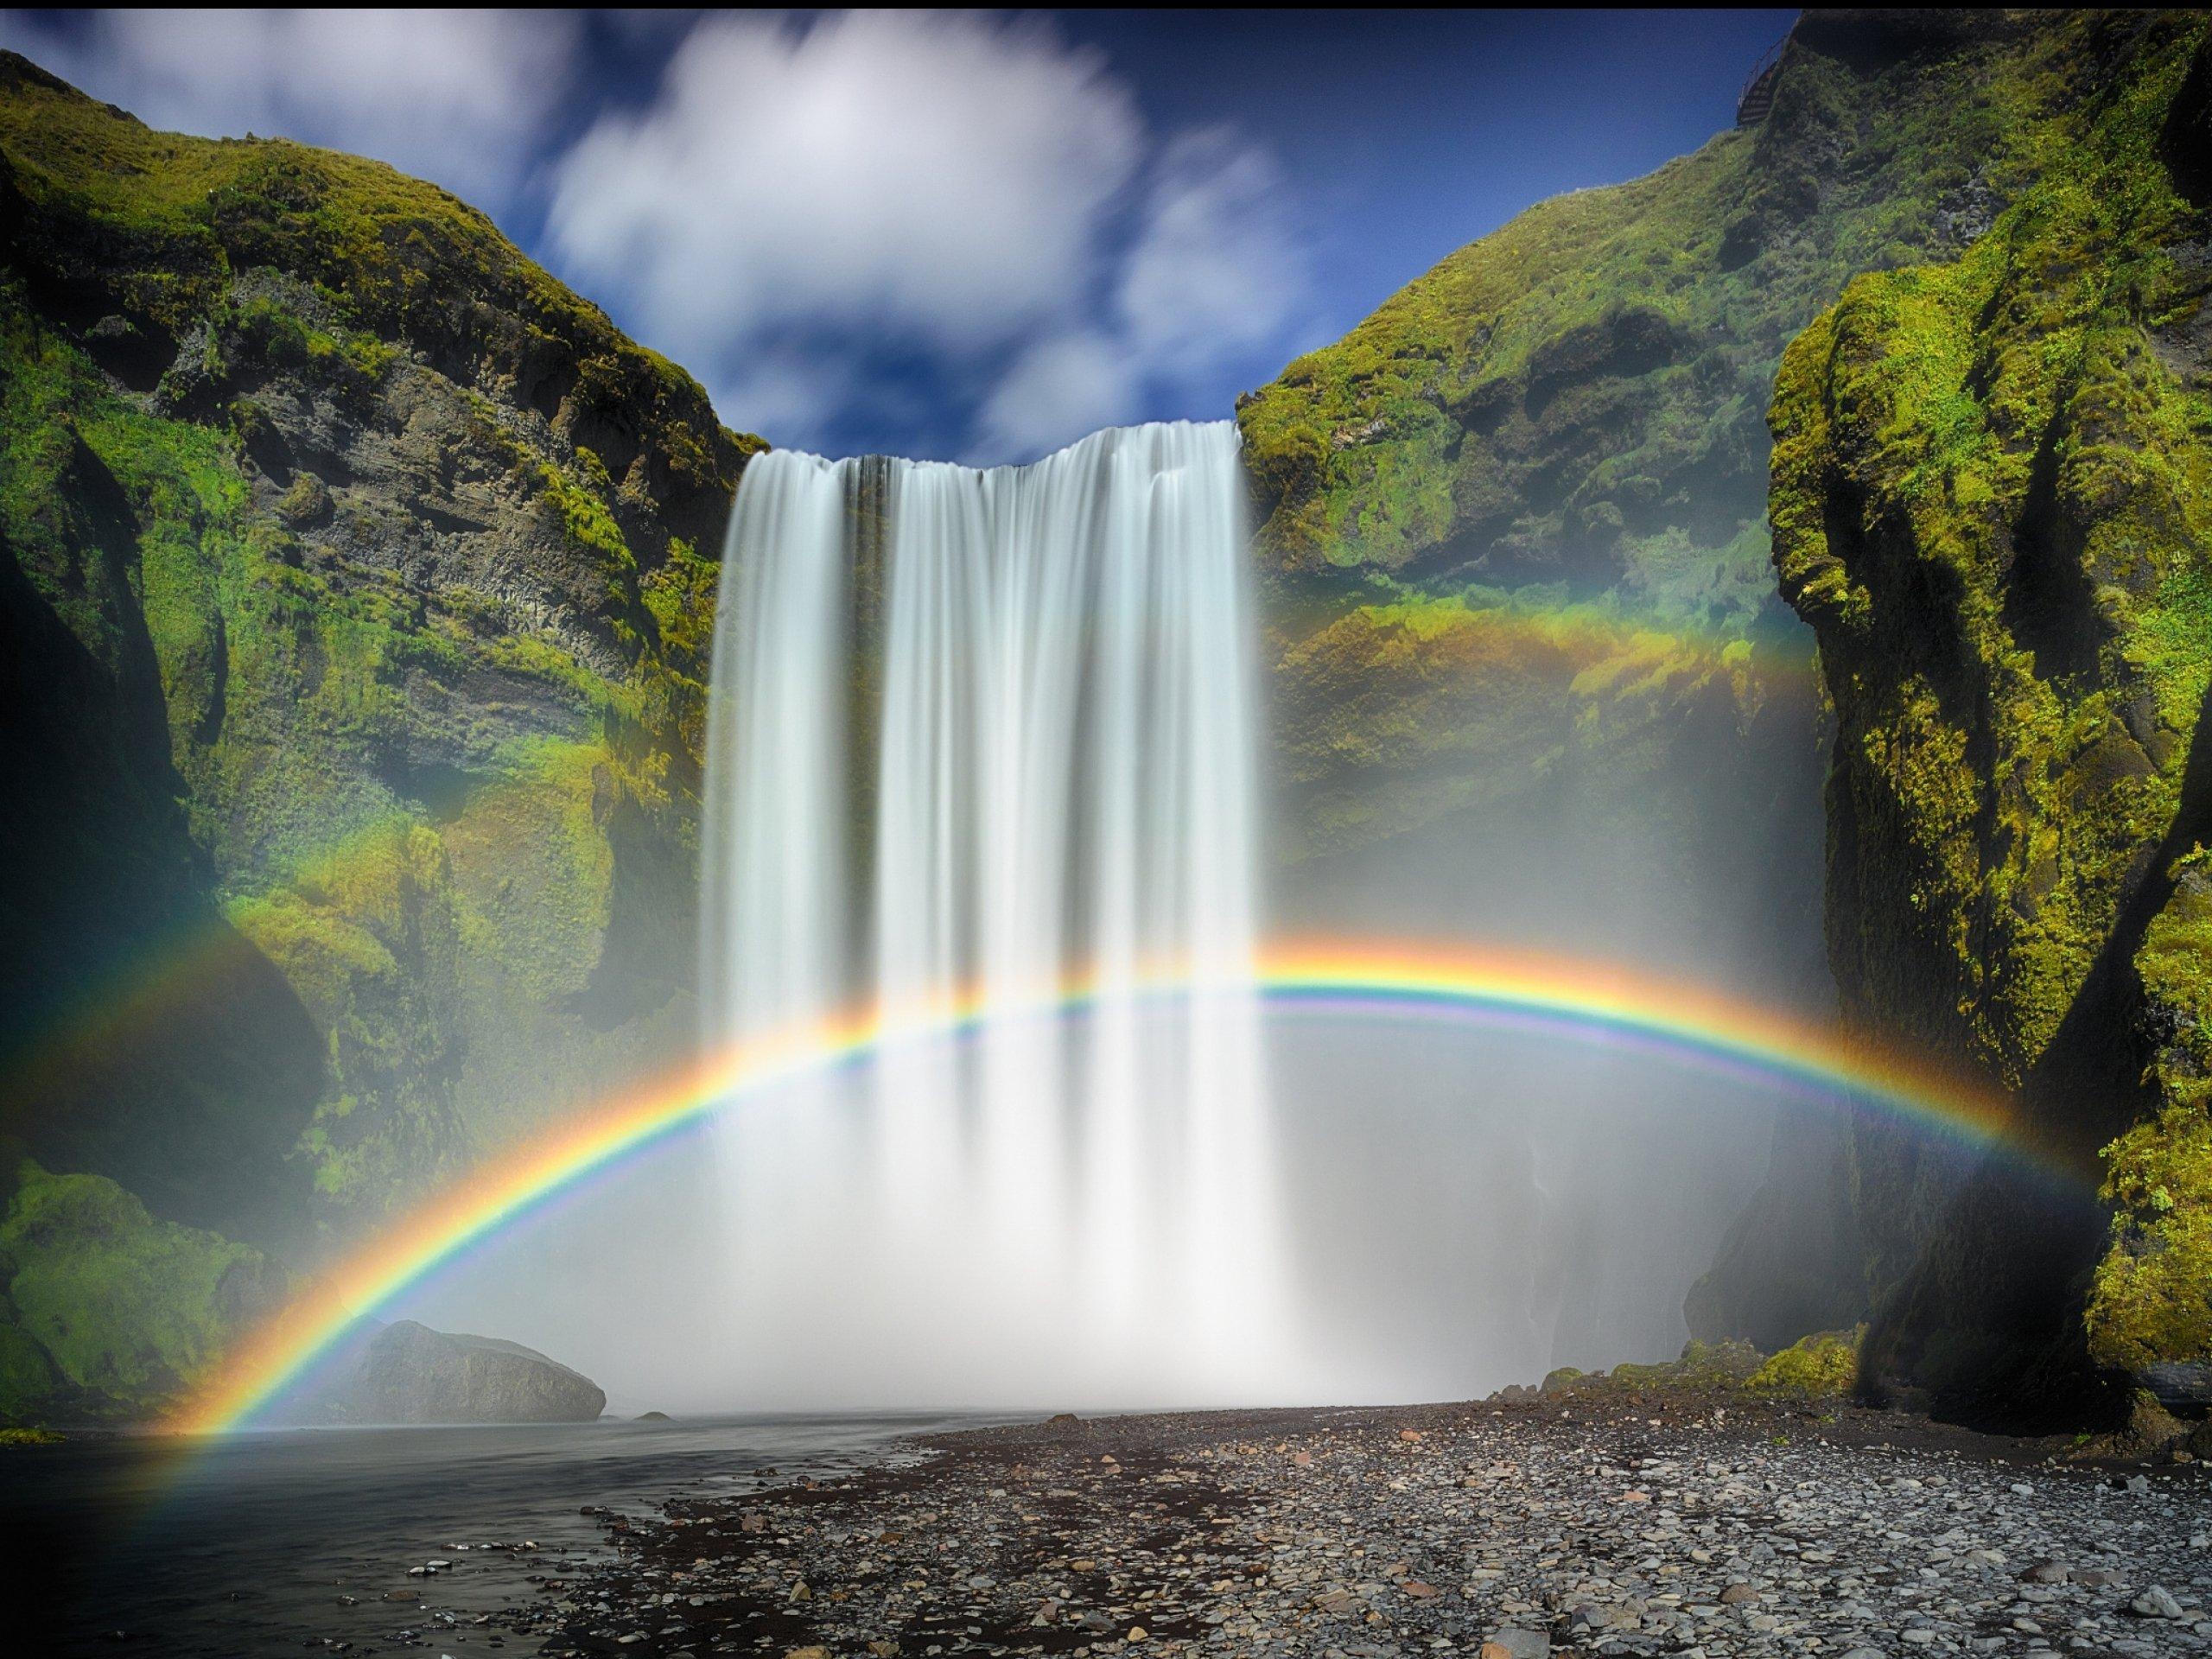 Rainbow Over Water Cascades Wallpapers - Wallpaper Cave